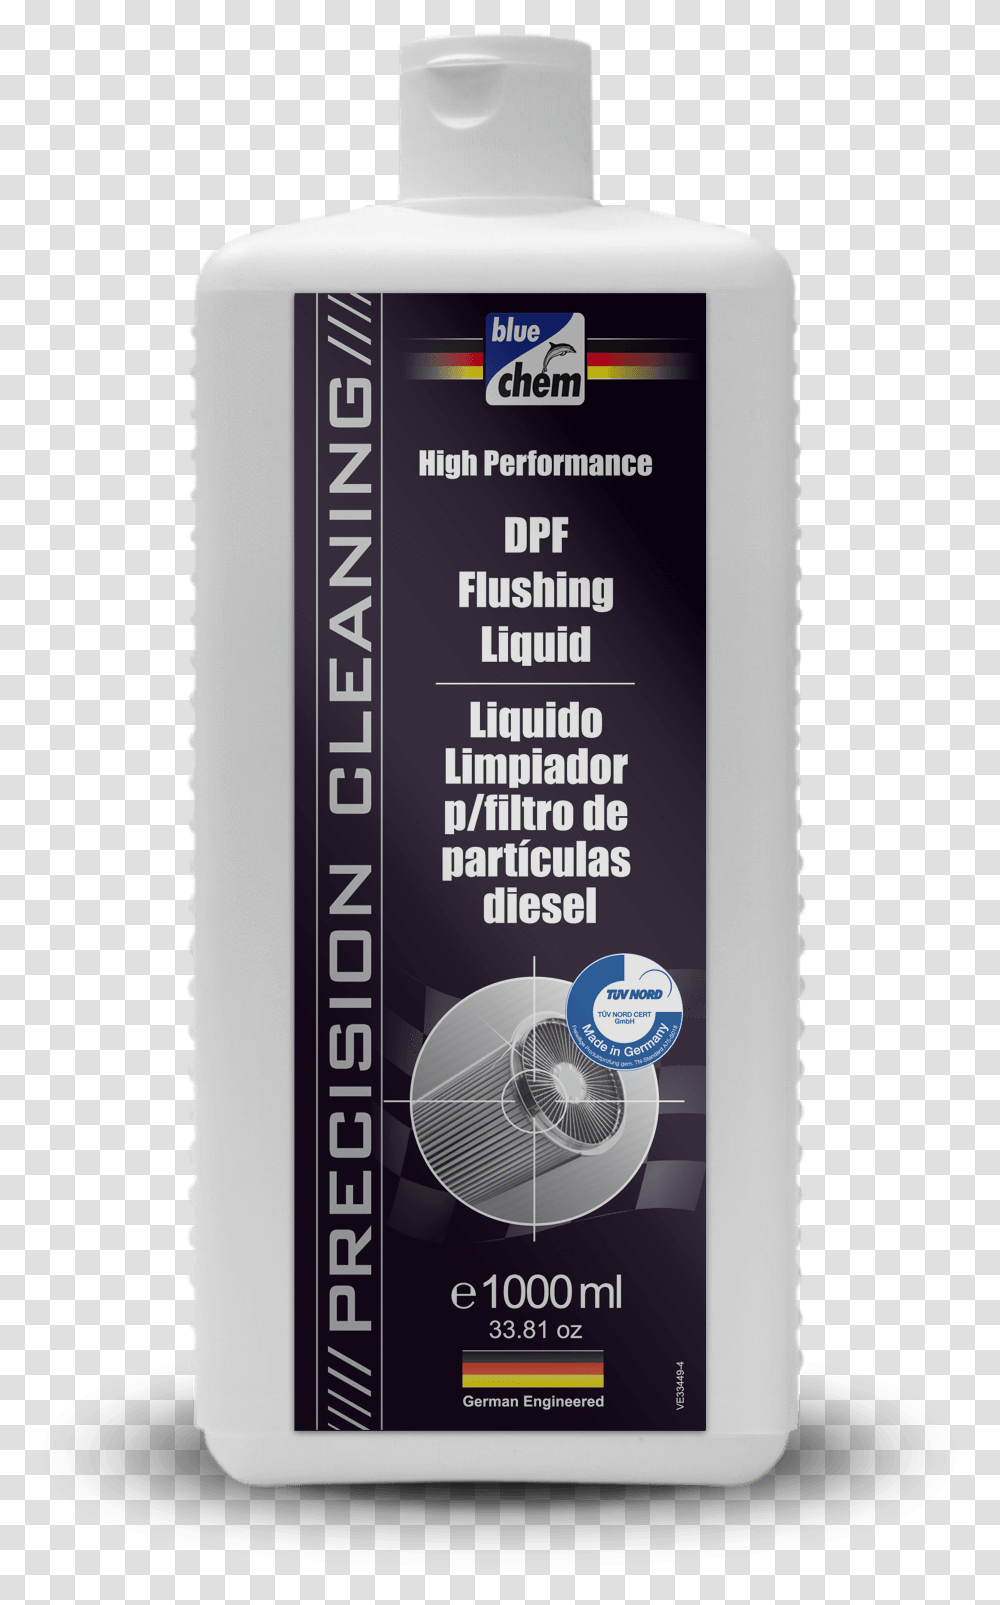 Dpf Flushing Liquid Cockle, Mobile Phone, Electronics, Paper, Postage Stamp Transparent Png